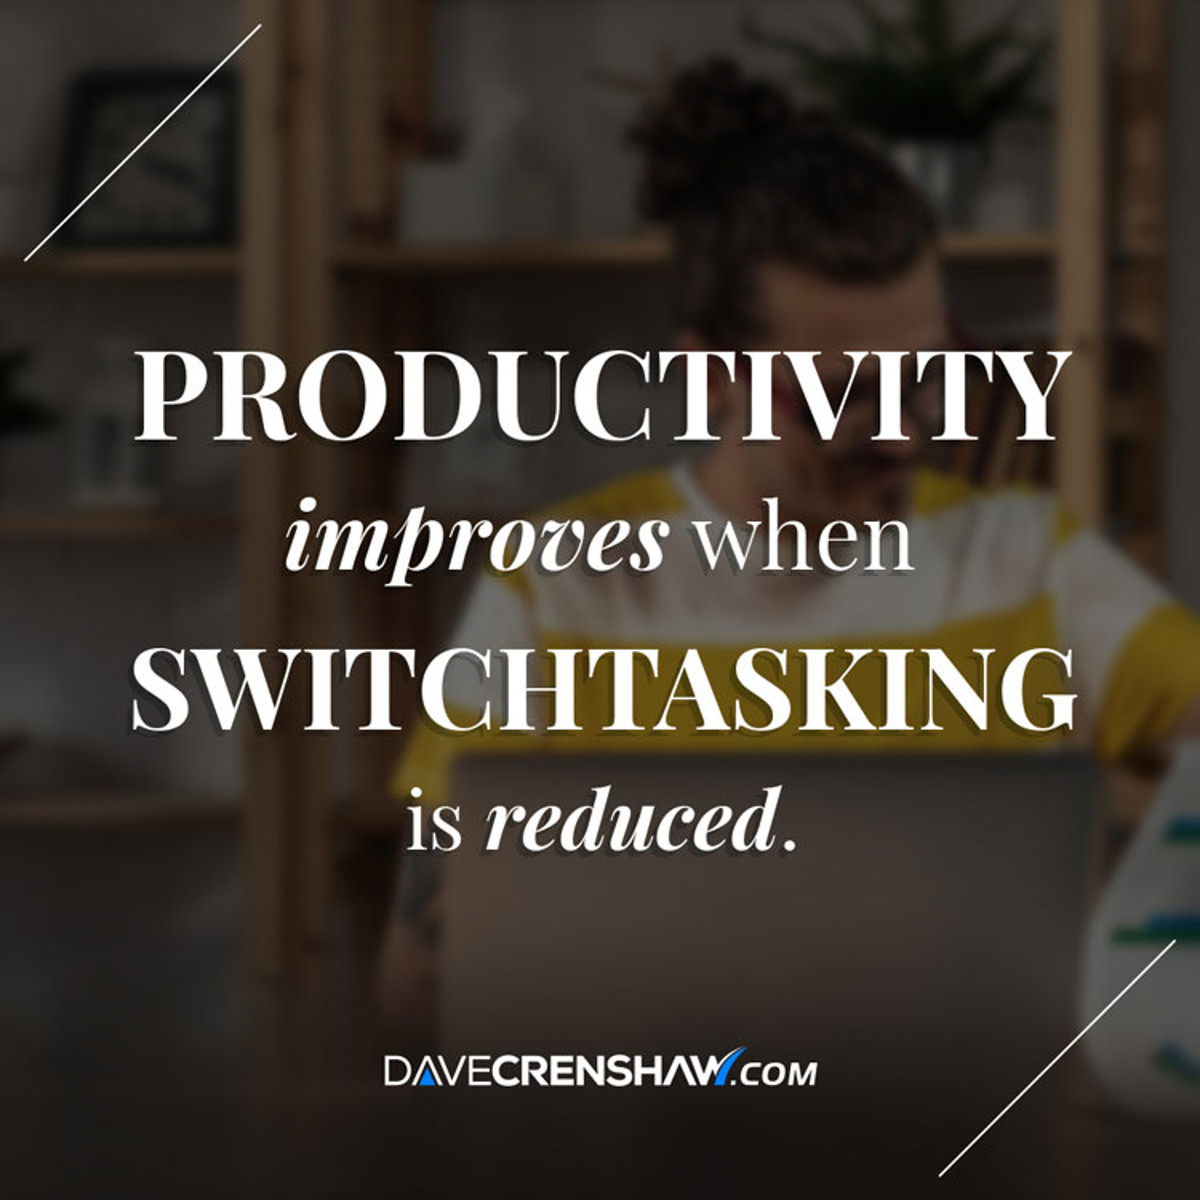 Productivity improves when switchtasking is reduced